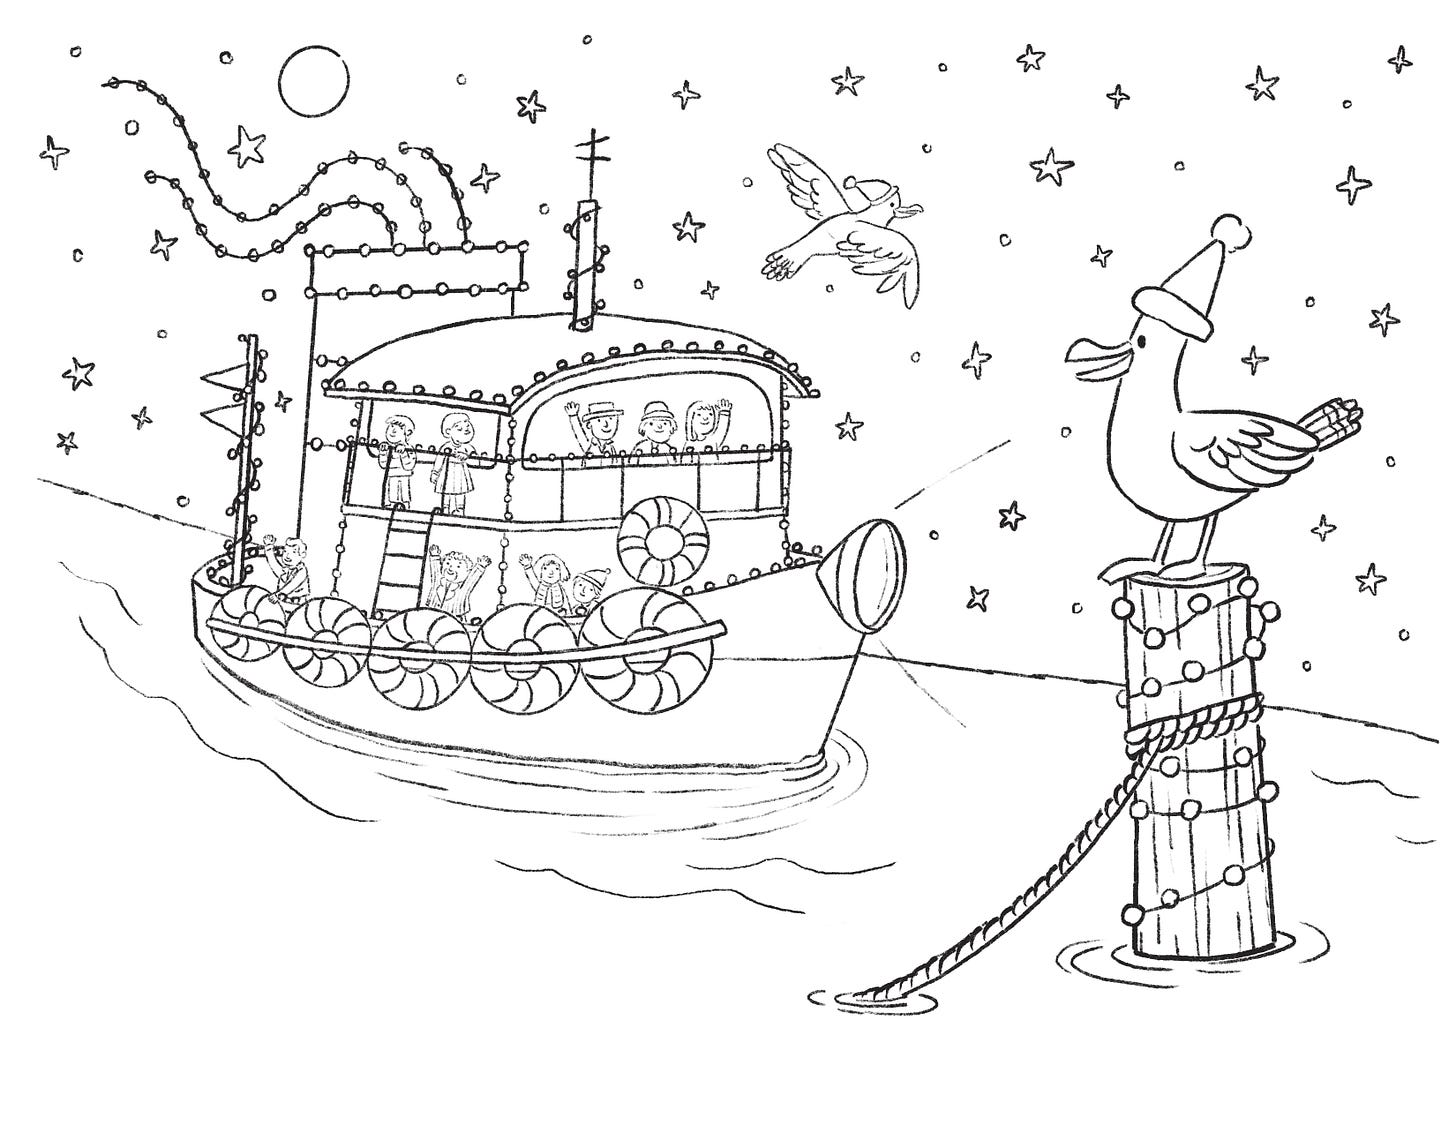 Coloring sheet for Christmas Ahoy illustrated by Kayla Stark